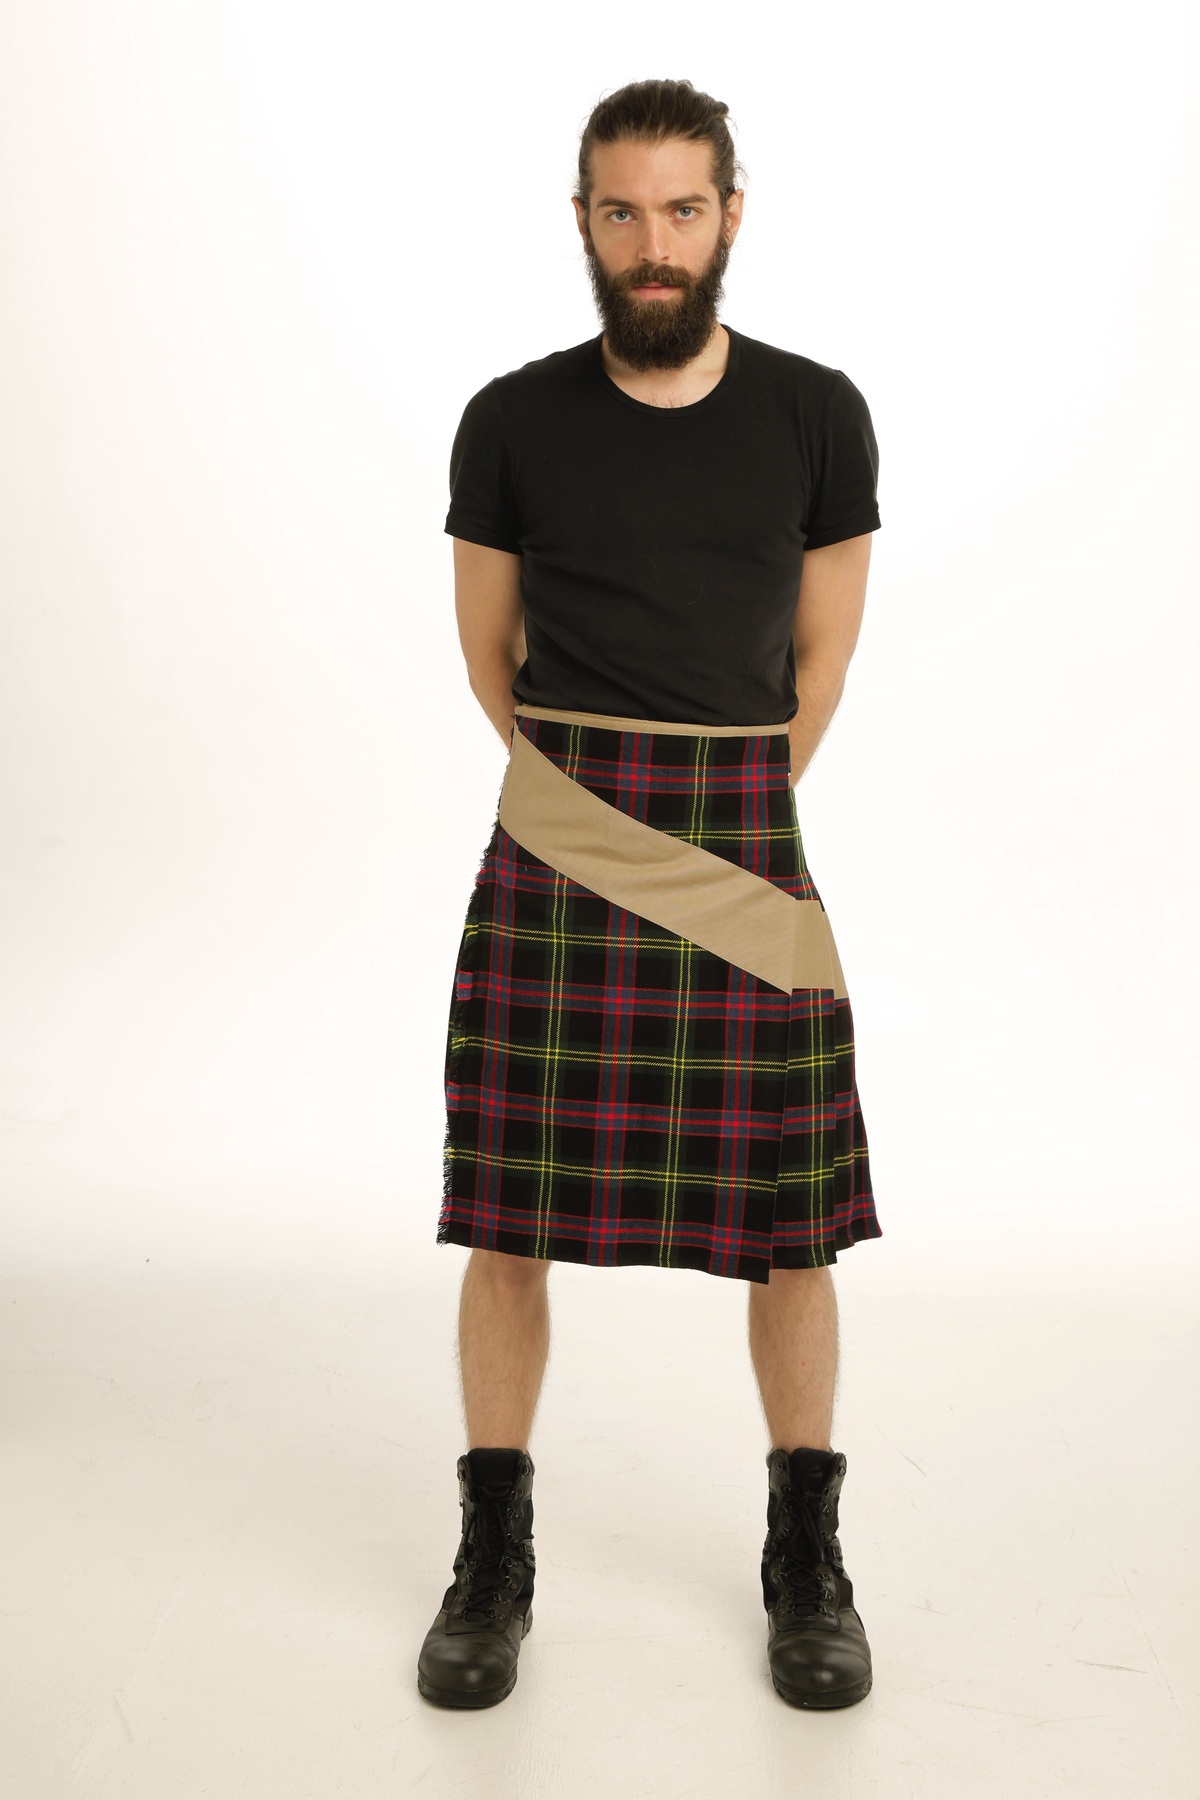 Elevate Your Style with Fashion Kilt Shop's Mens Kilt Outfit